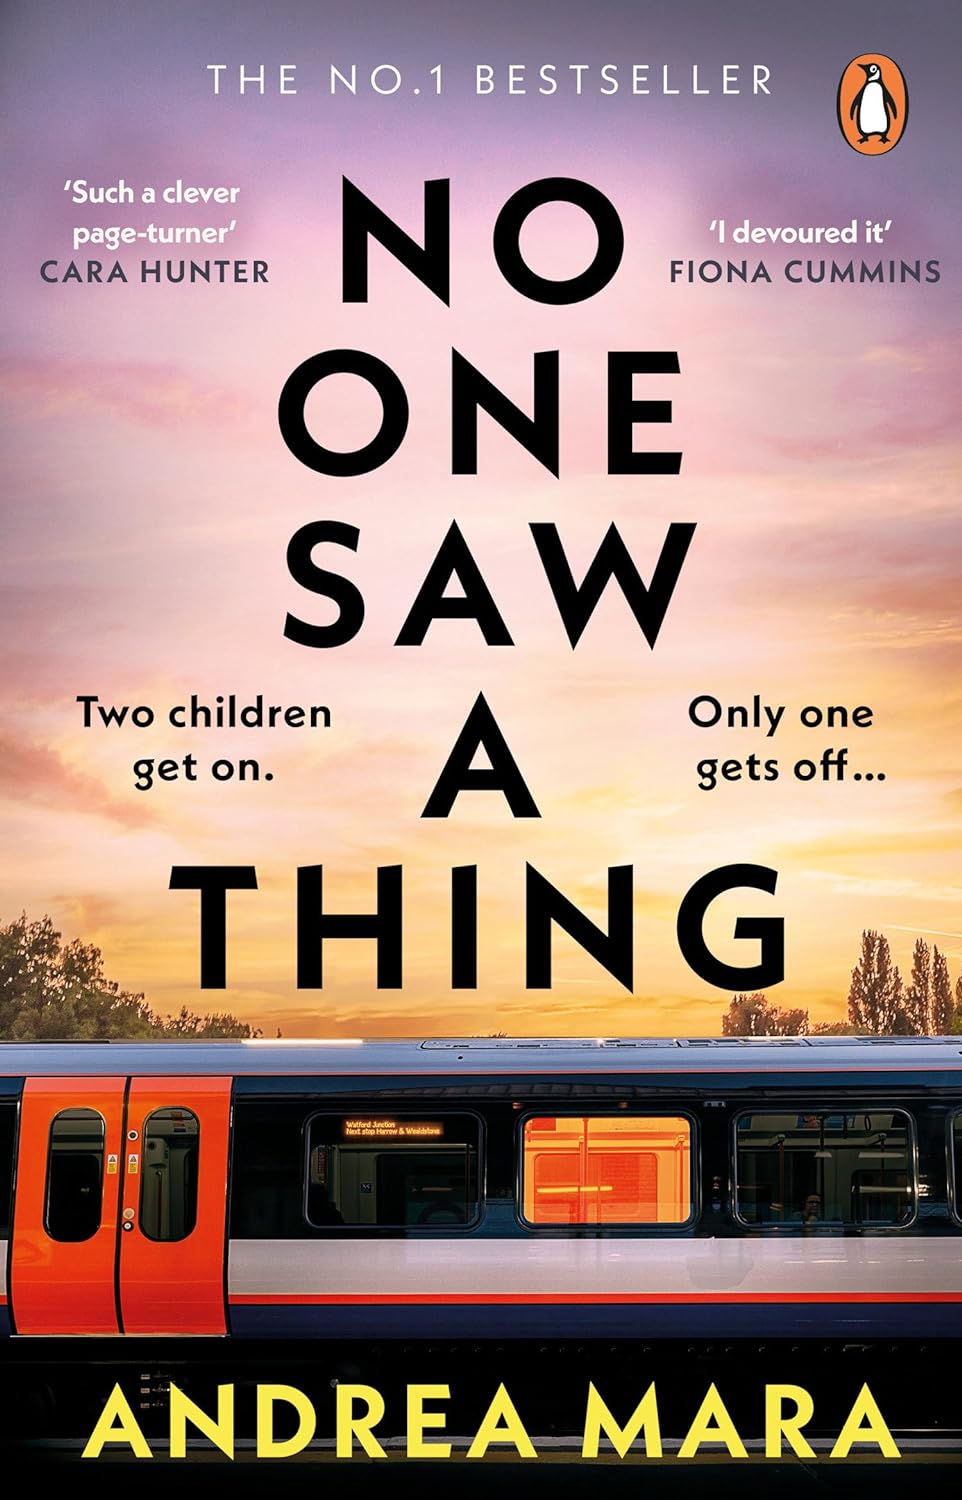 No One Saw A Thing - Paperback